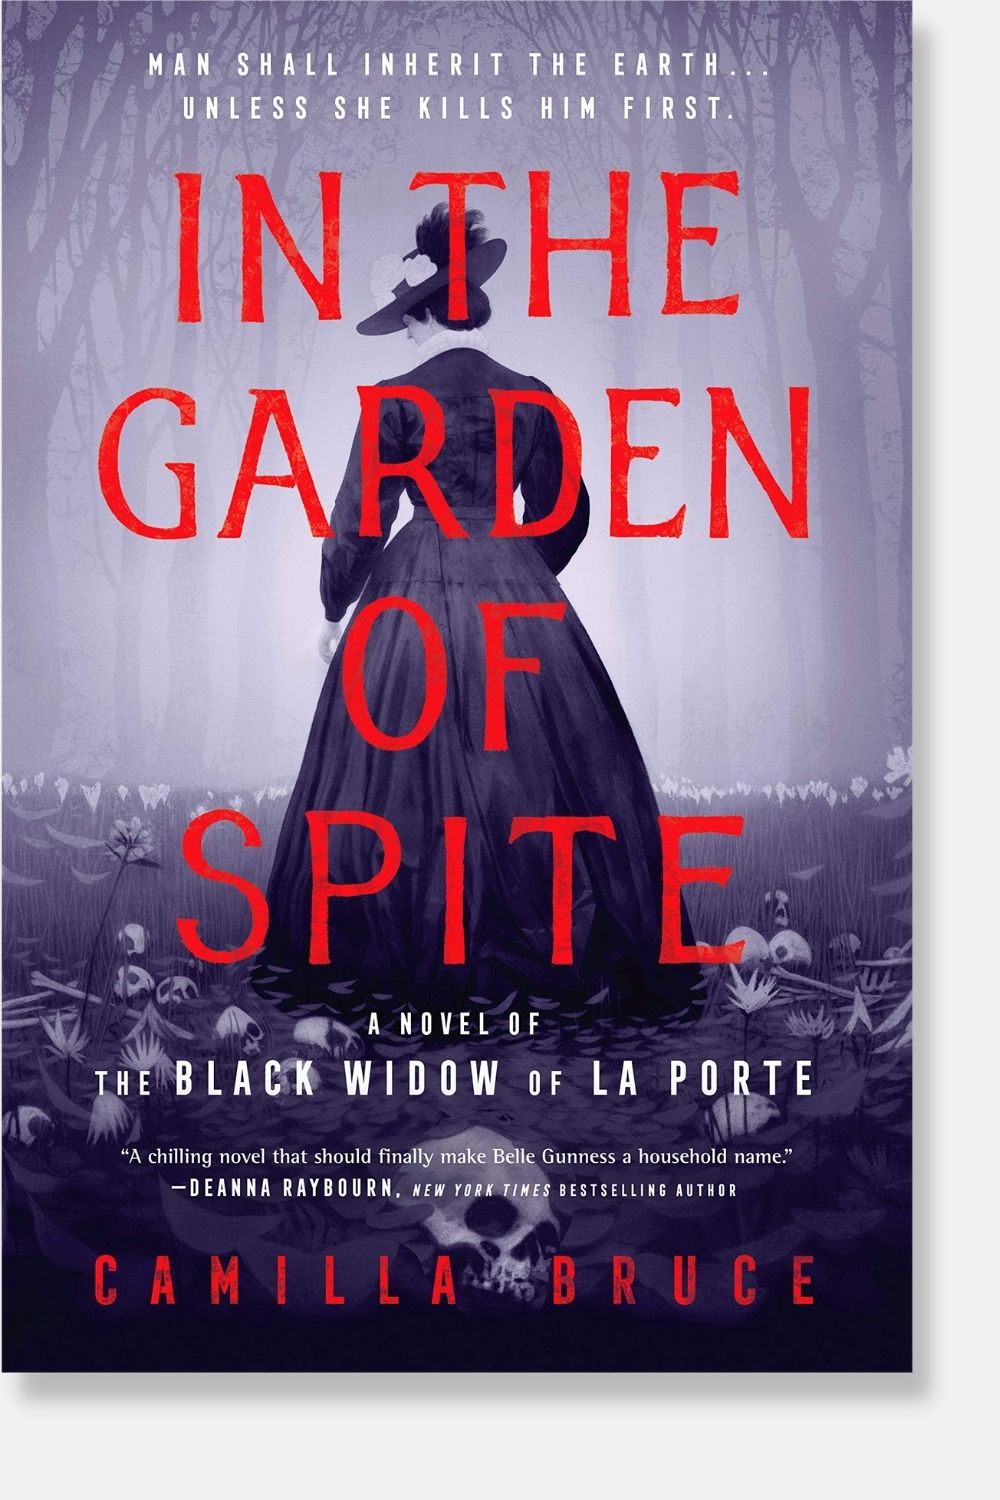 In the Garden of Spite book cover